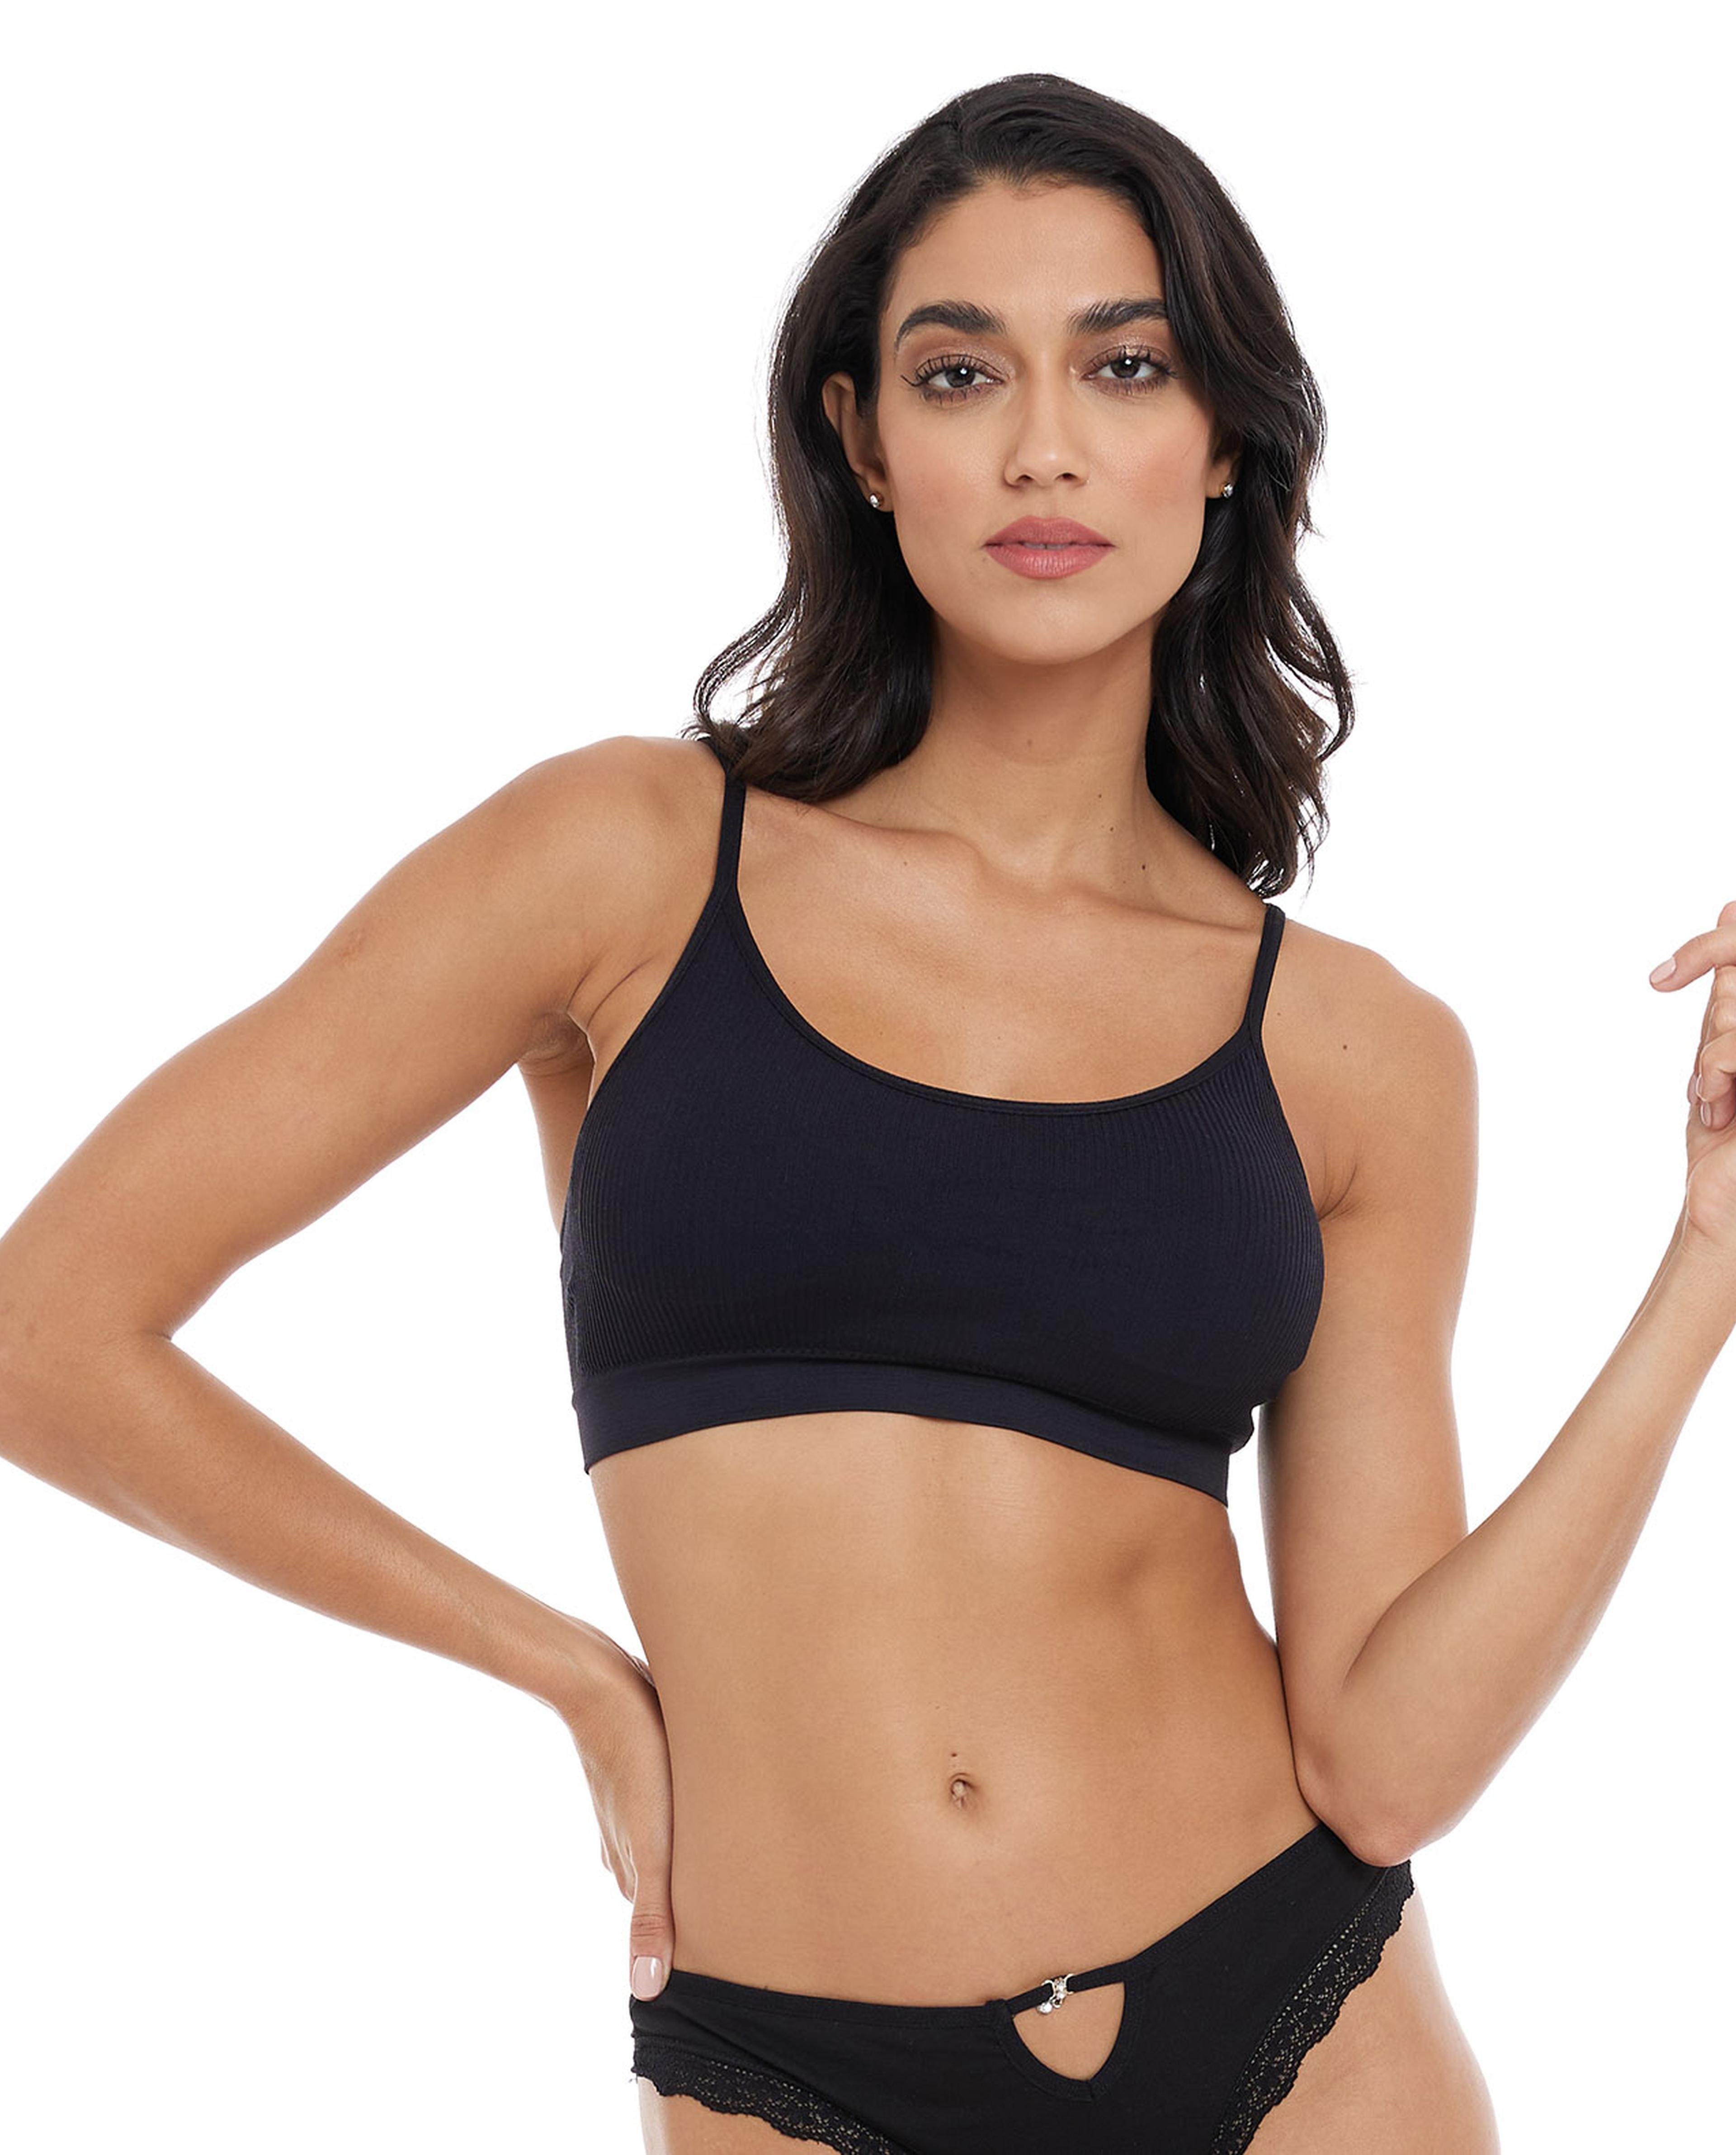 Bra By Padding: Shop for Bras by Padding Online